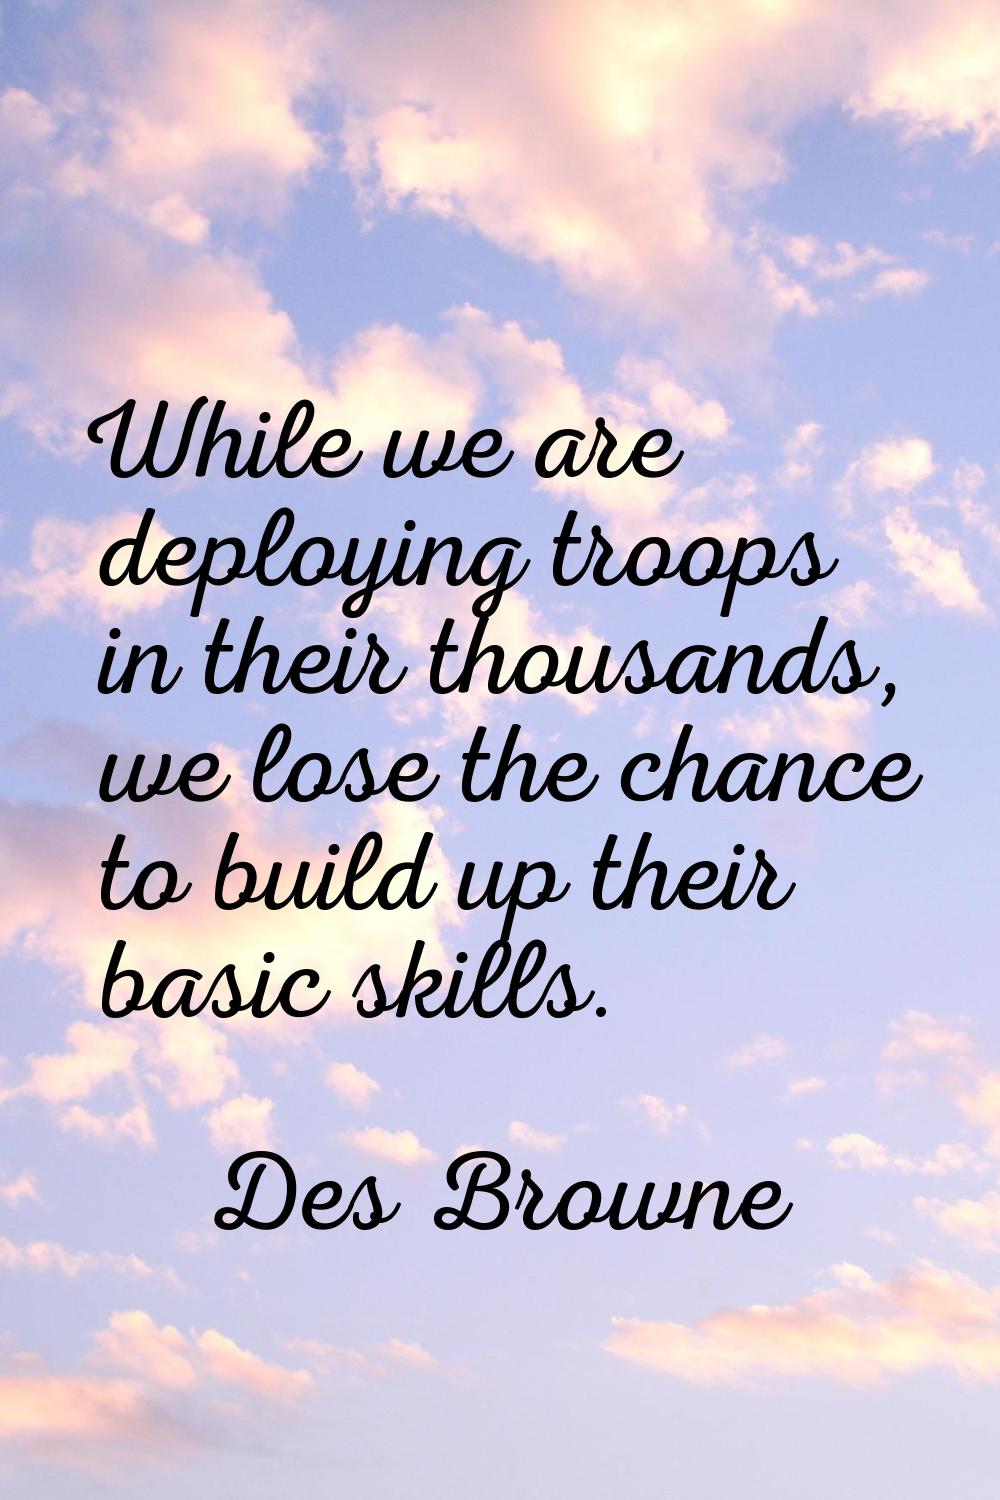 While we are deploying troops in their thousands, we lose the chance to build up their basic skills